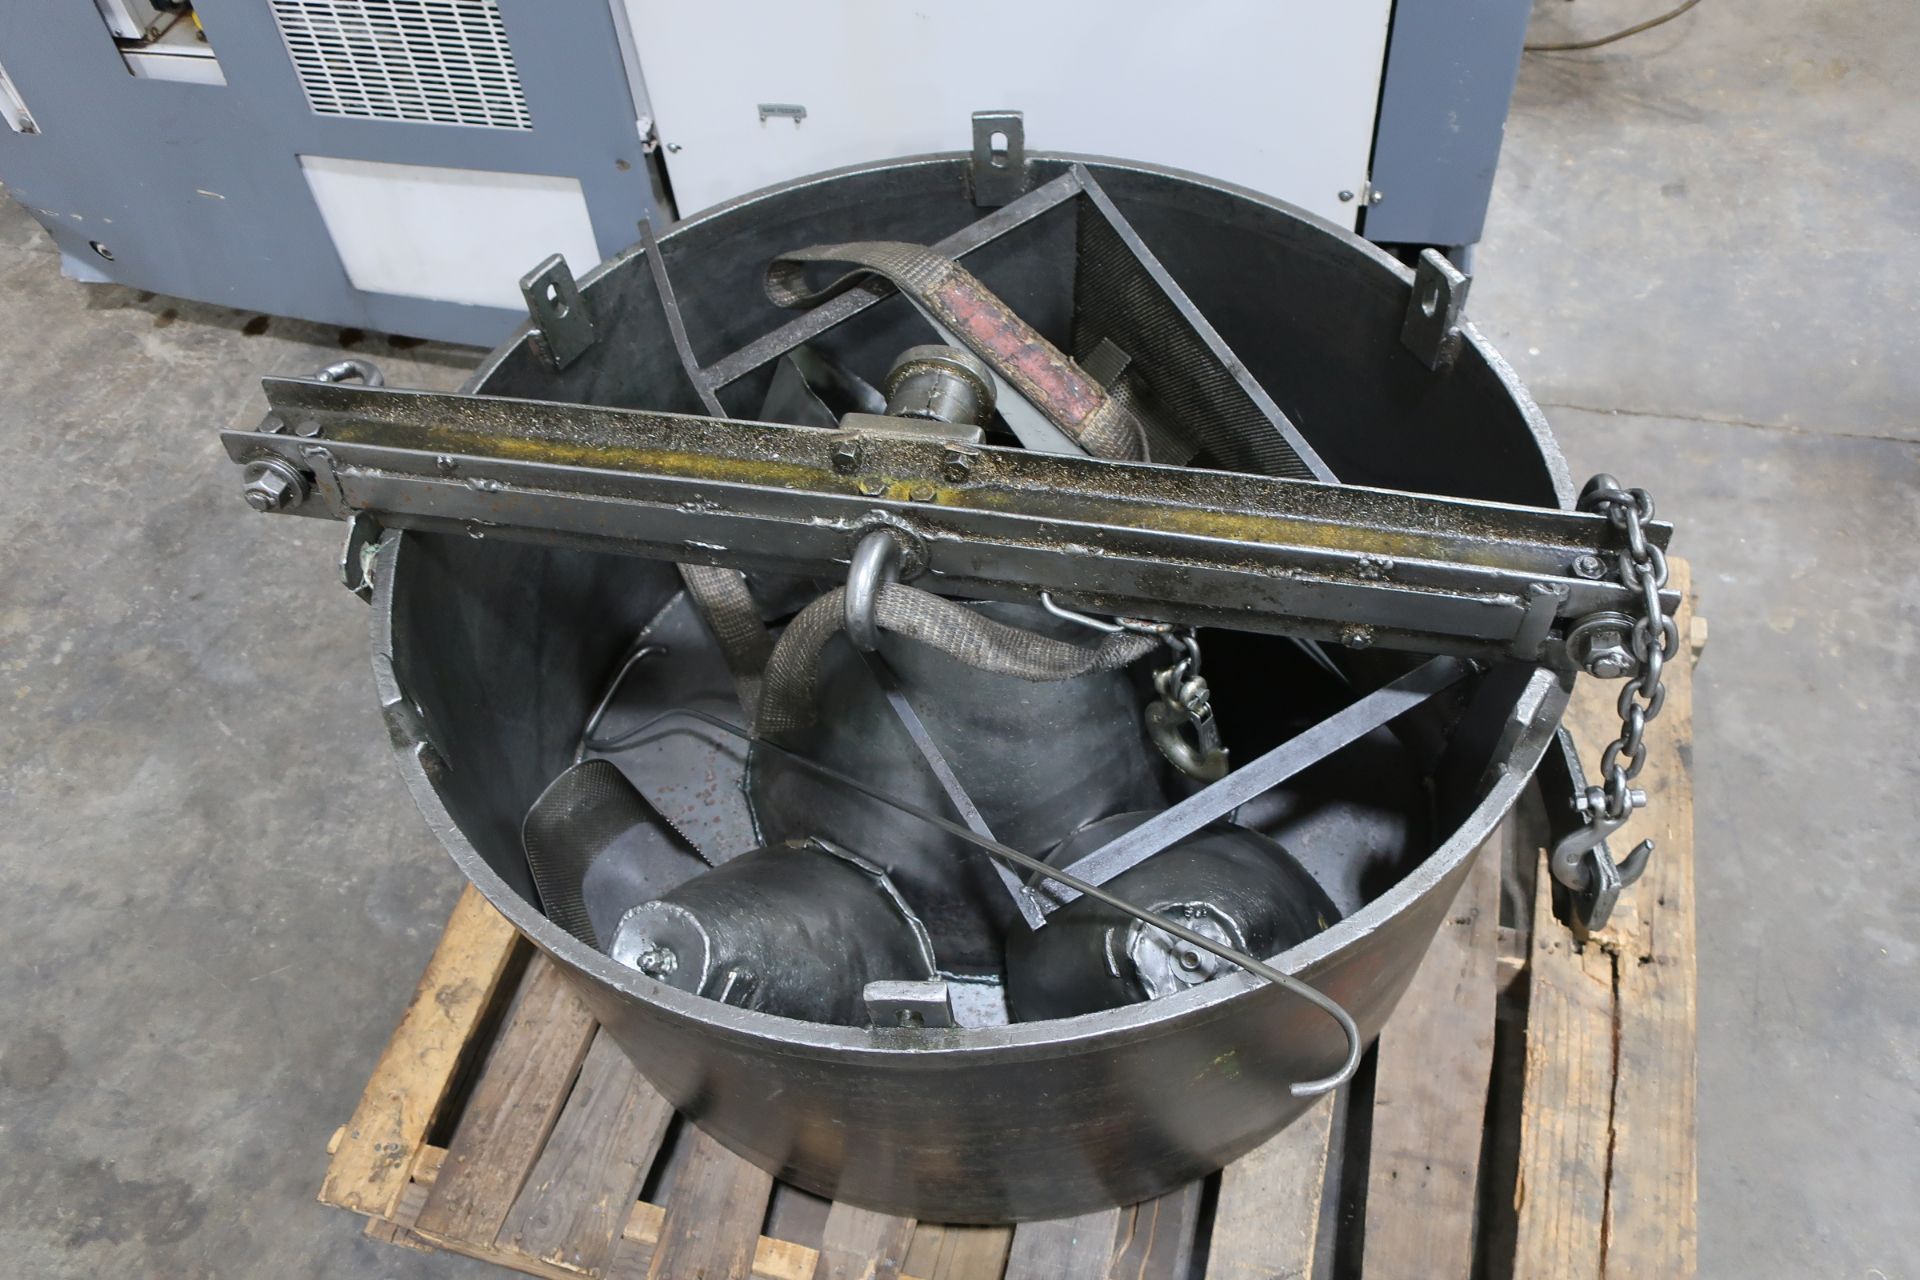 TOLHURST 40" CENTER SLUNG CHIP SPINNER WITH TWO SPINNERS, 3 BASKETS, - Image 3 of 14